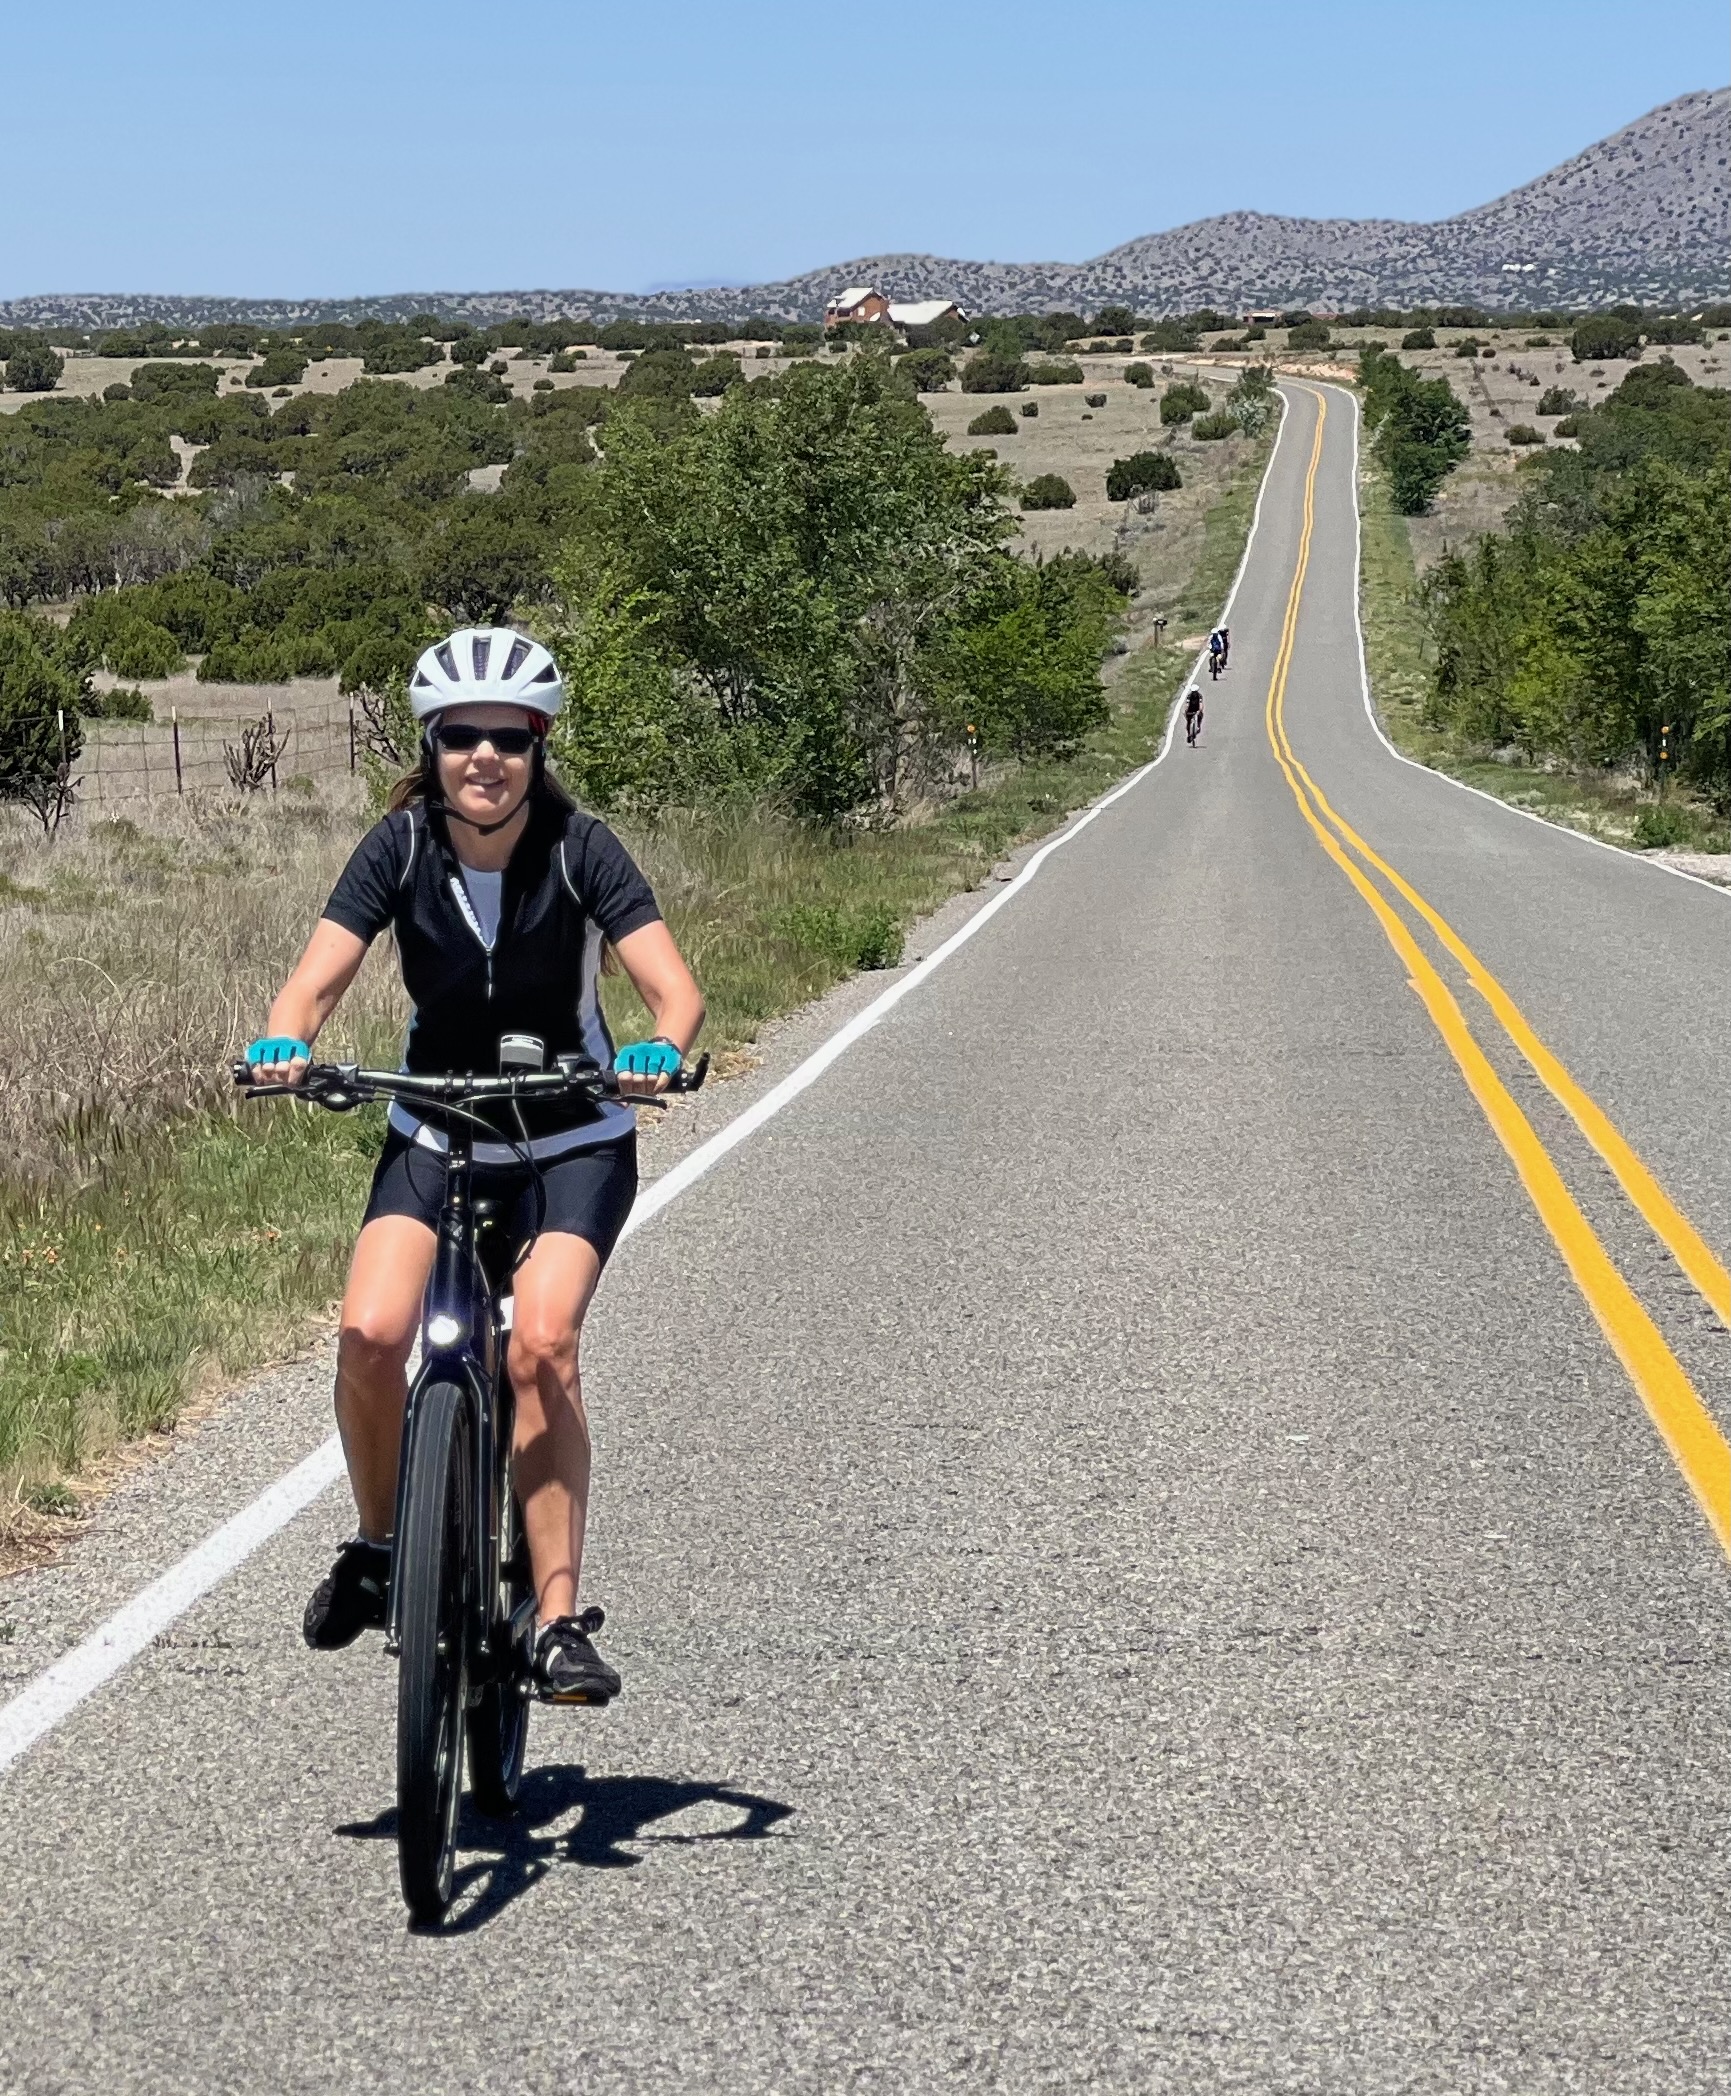 Cyclist on an ebike on an open road